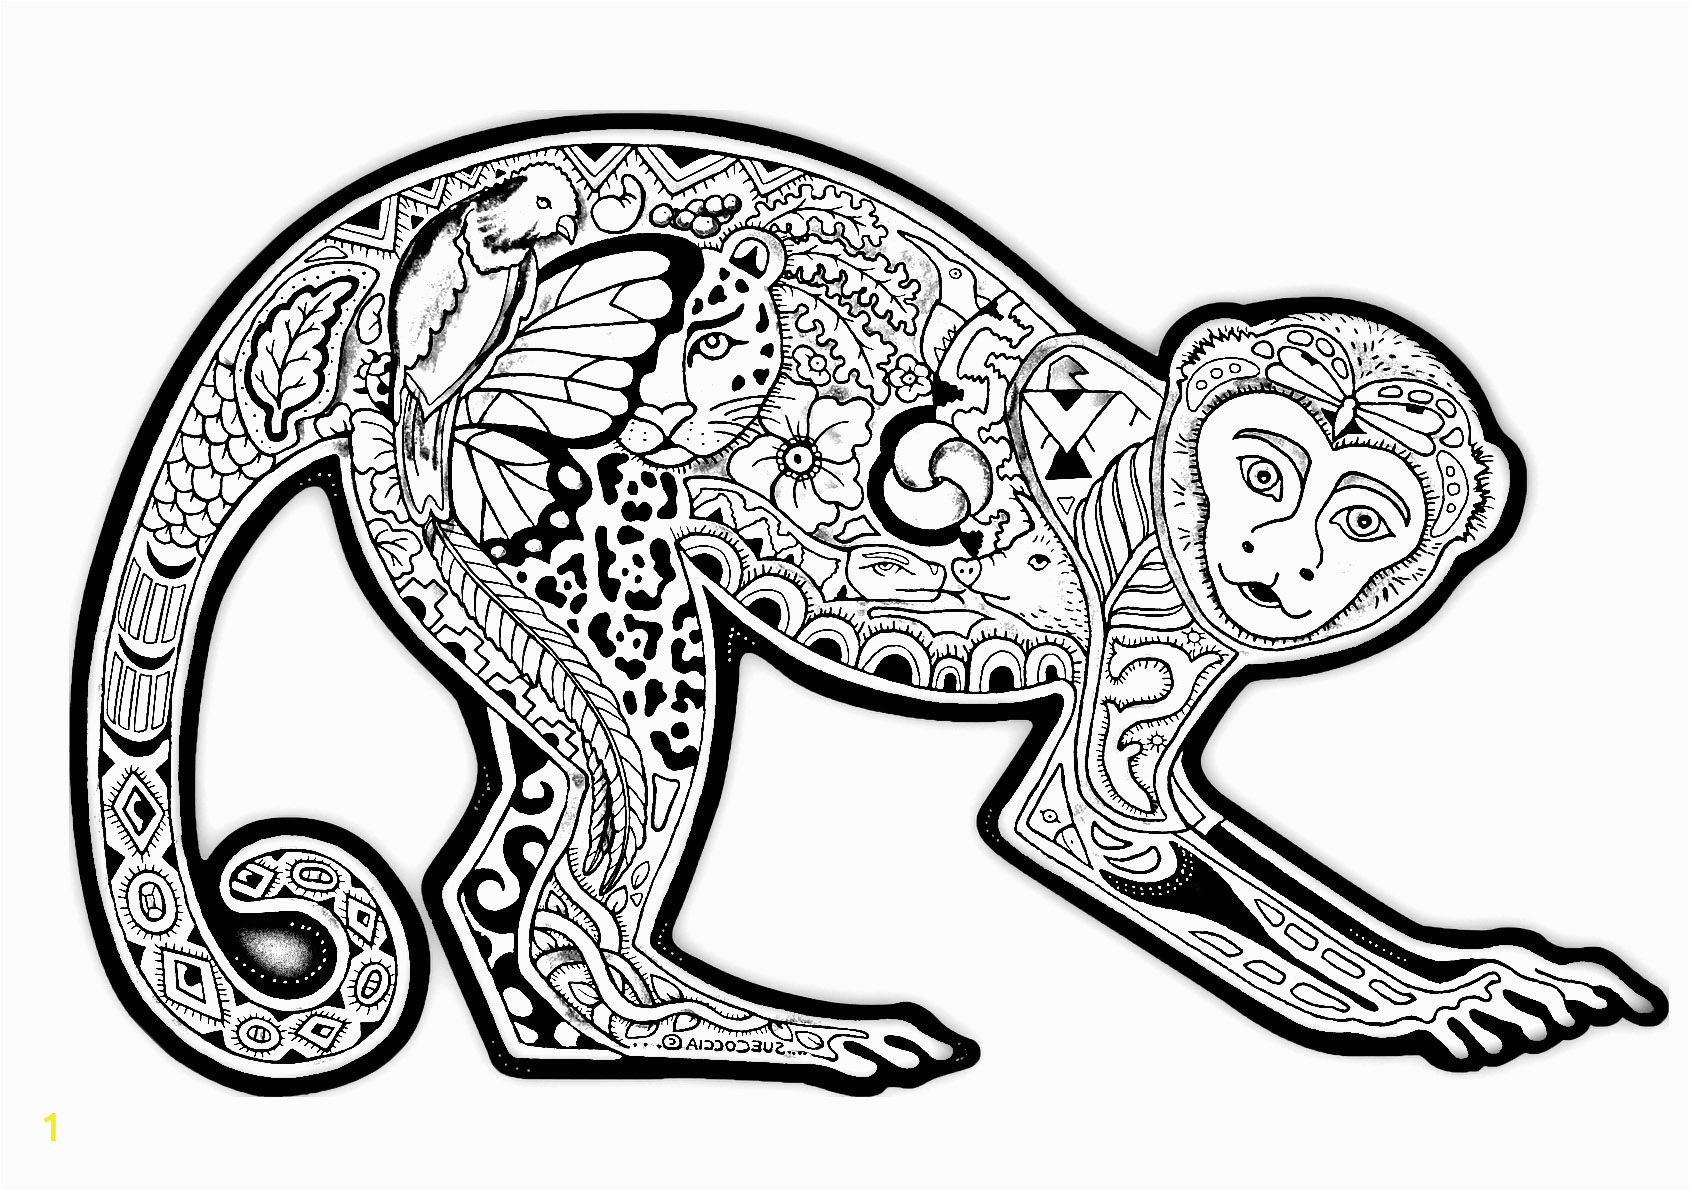 Hard Animal Coloring Pages Free Coloring Page Coloring Difficult Monkey A Coloring